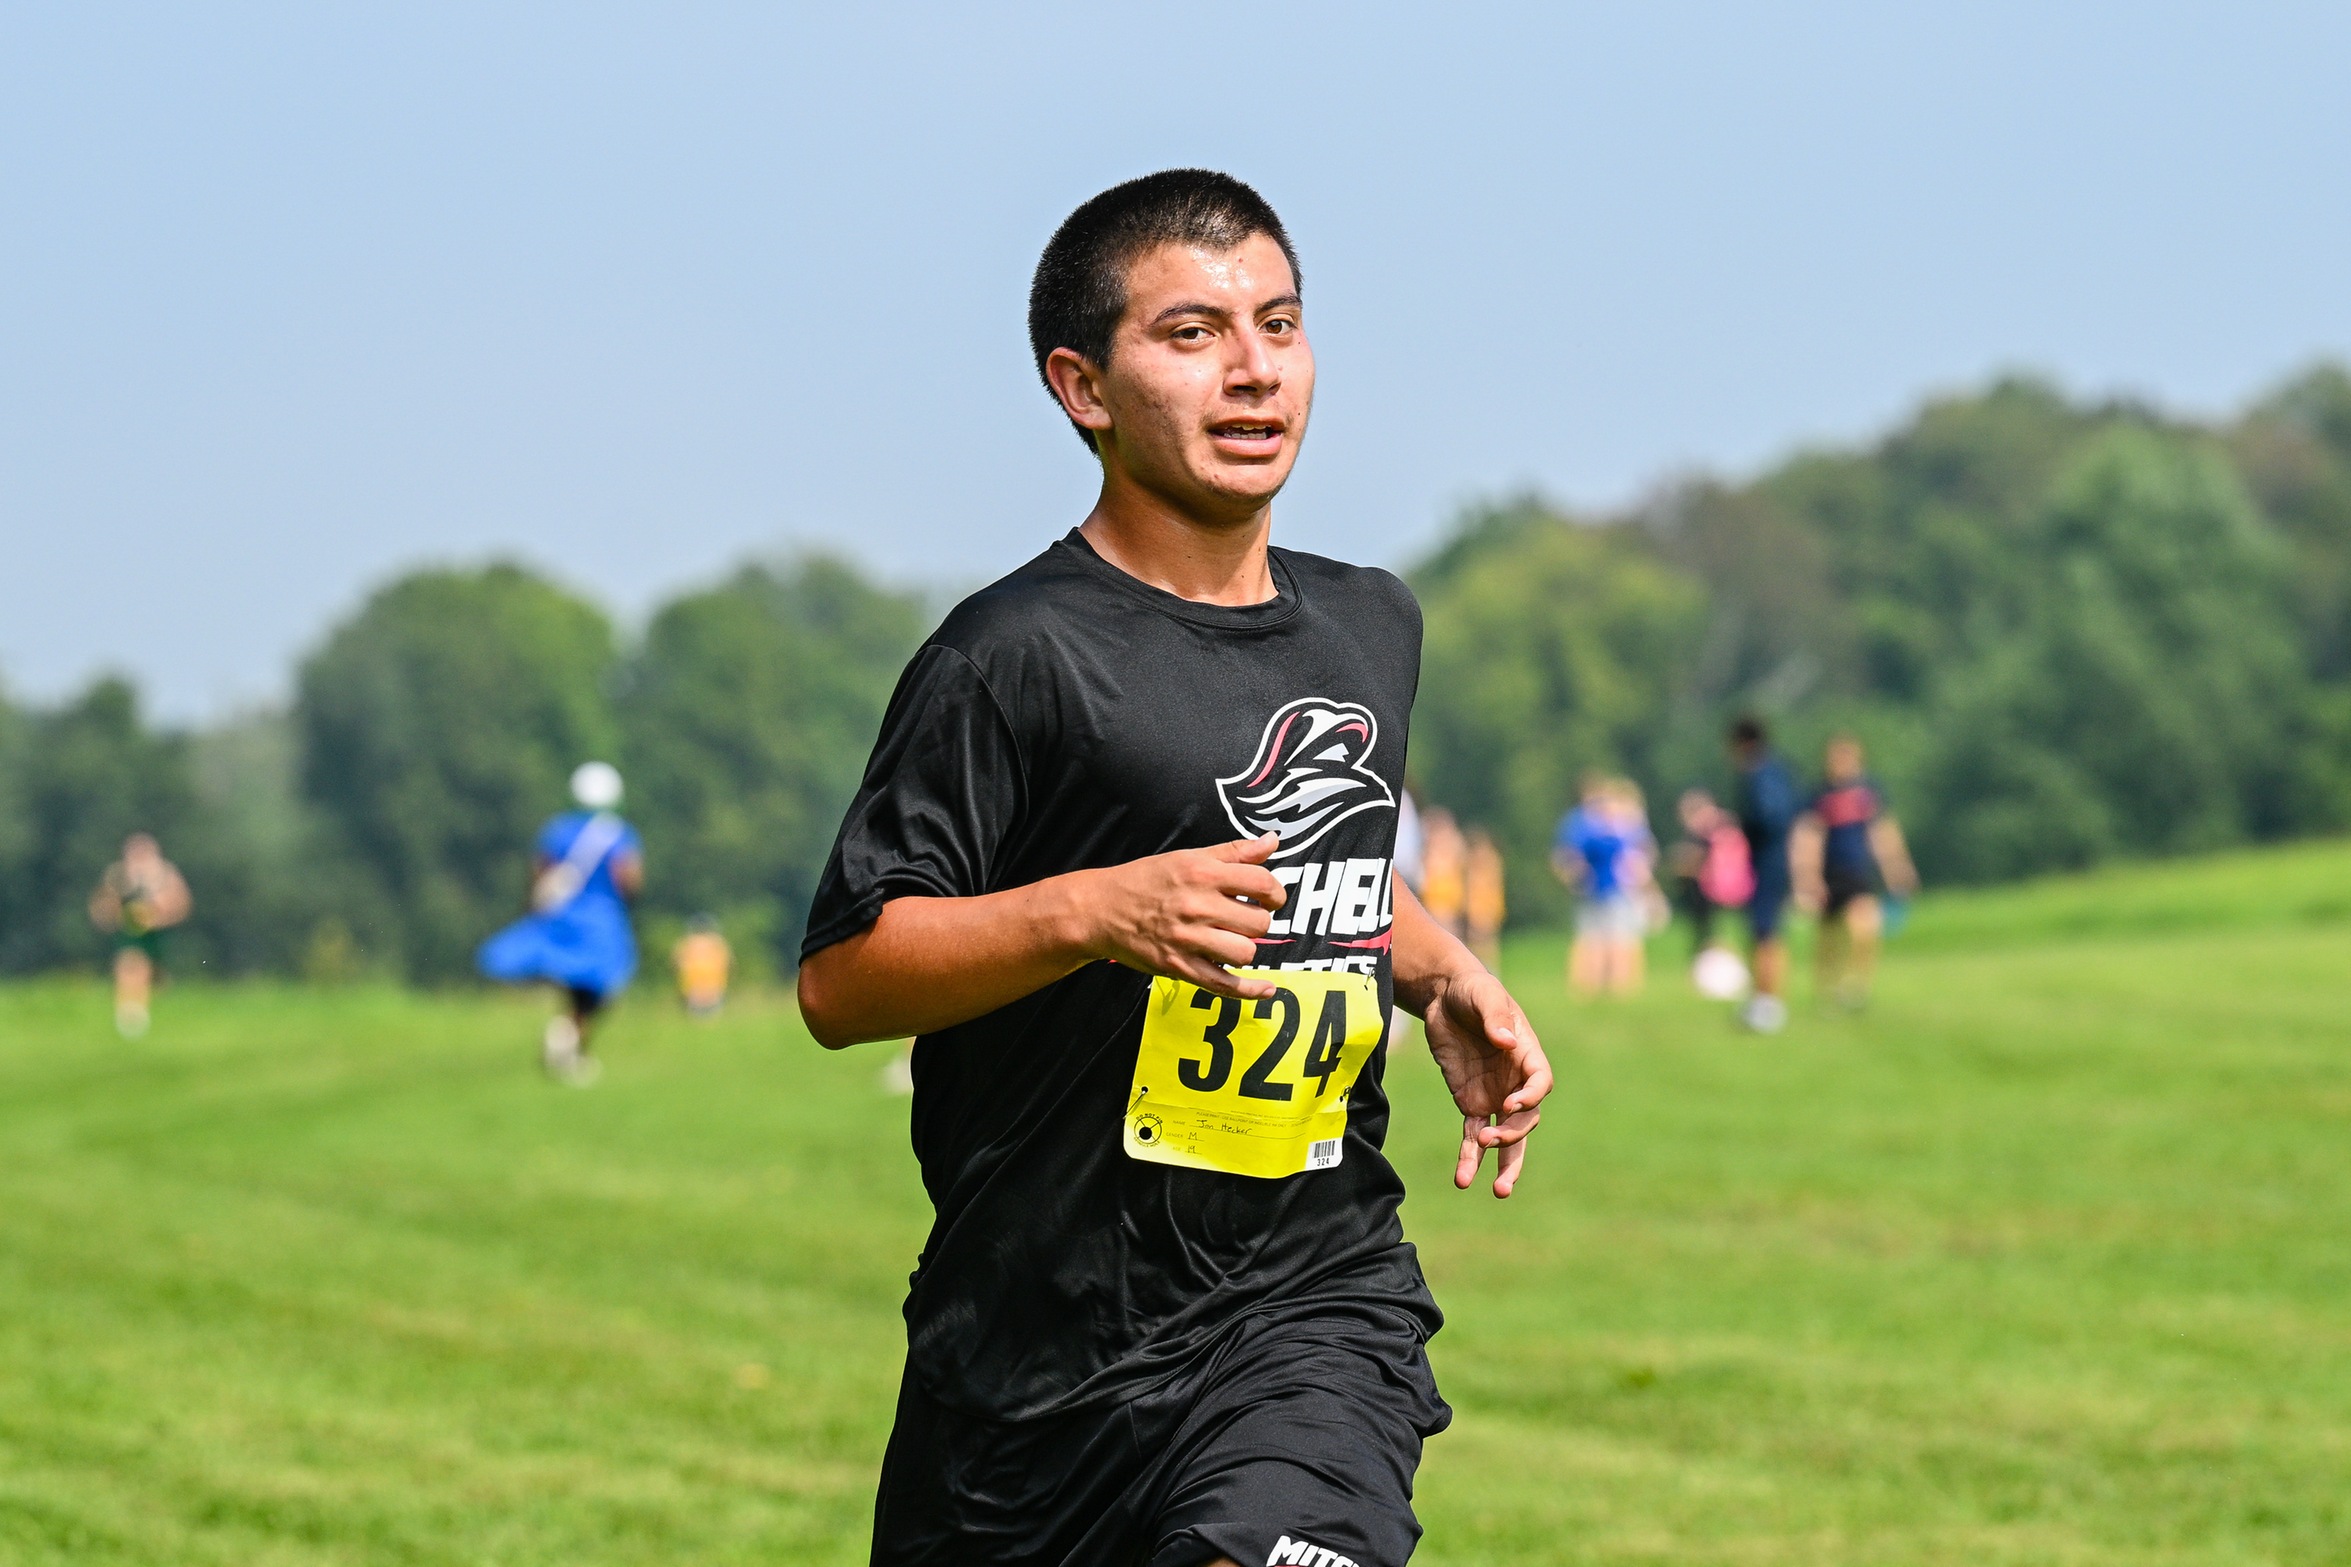 Cross Country Races at Blazer Classic